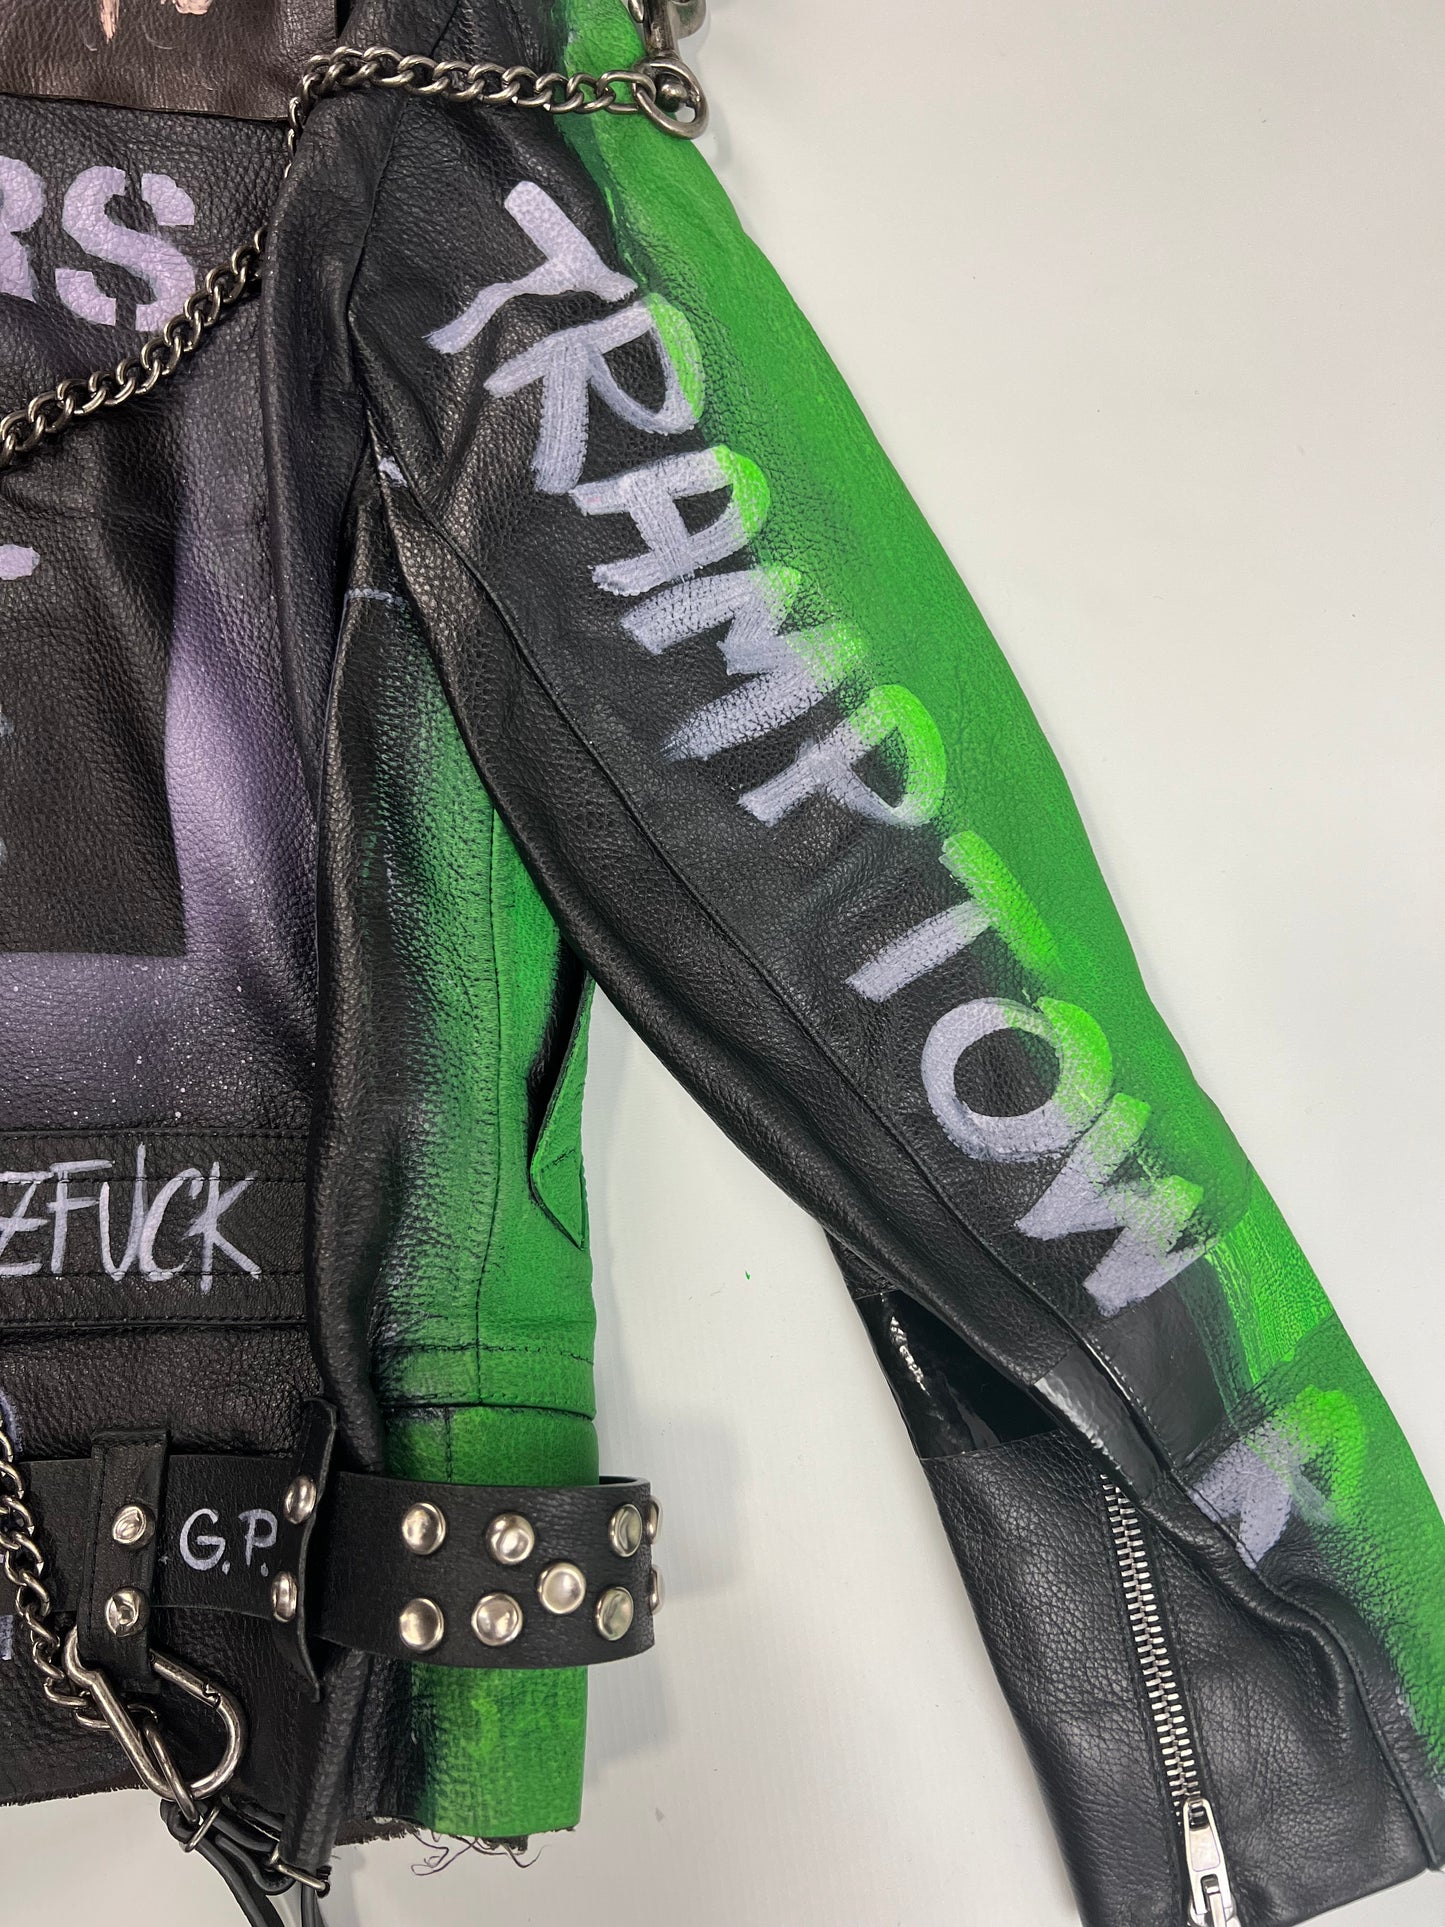 Vetements AW17 1of5  runway slime green perfecto sprayed punk leather Jacket SZ:L